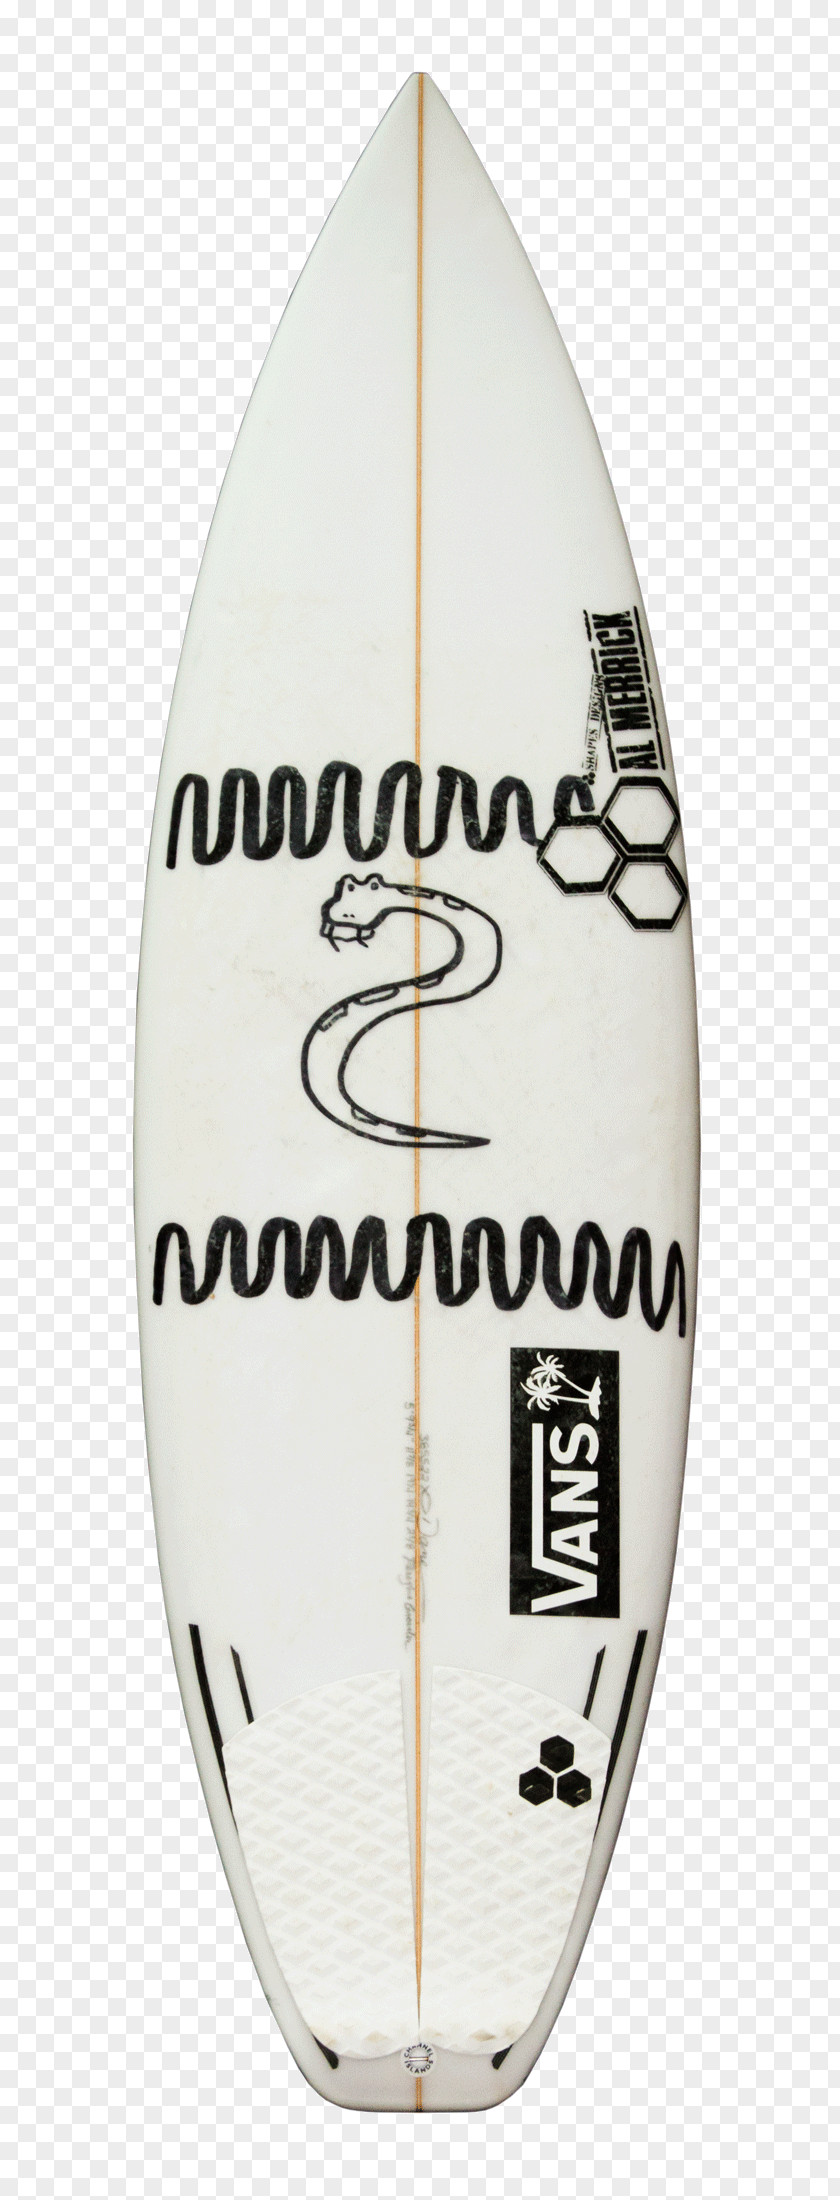 Surfing Surfboard White Black PNG